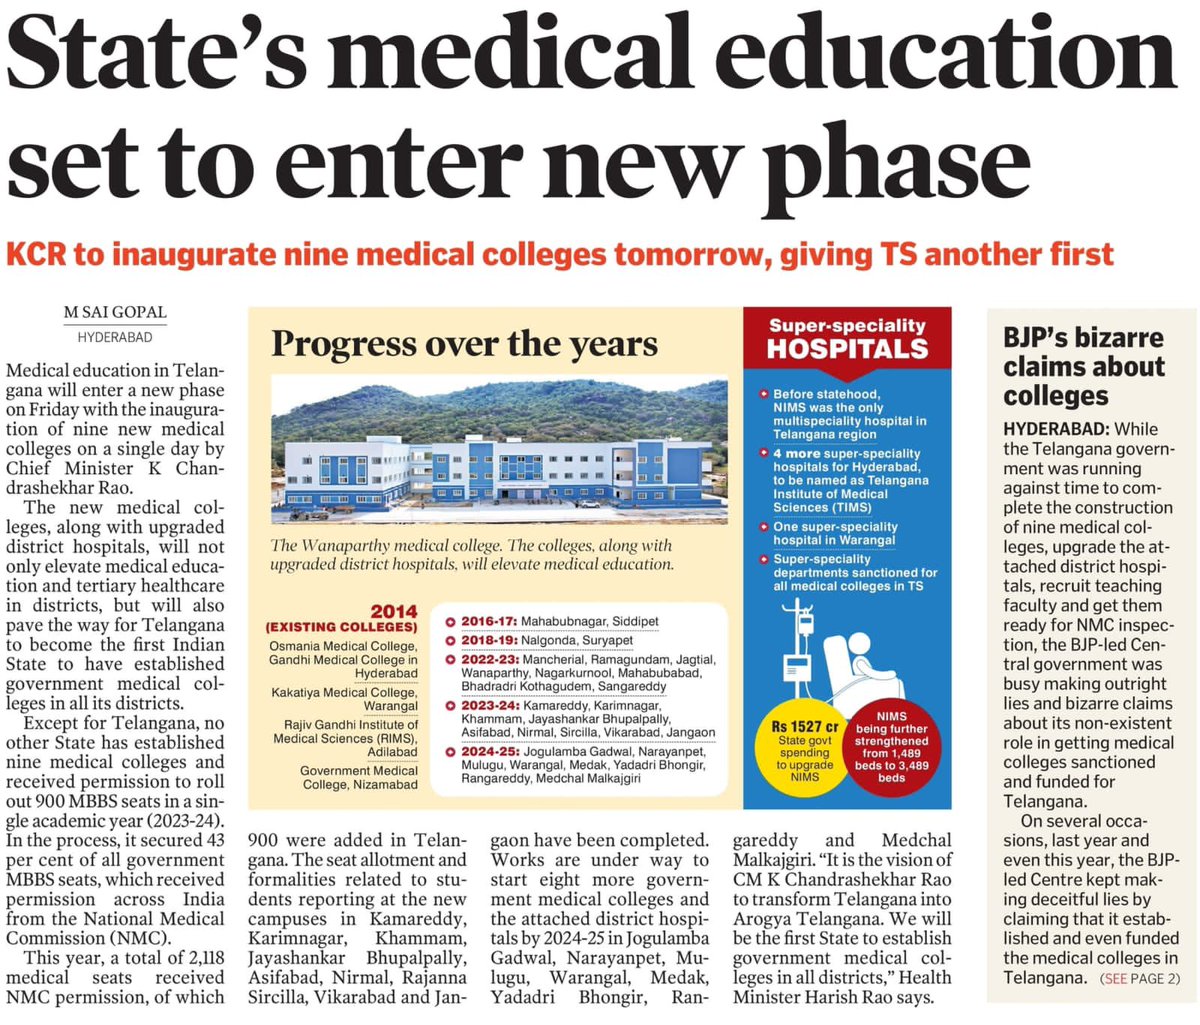 Telangana's Medical Education Set to Enter New Phase Medical education in Telangana will enter a new phase on Friday with the inauguration of nine new medical colleges on a single day by Chief Minister Sri K Chandrashekhar Rao. The new medical colleges, along with upgraded